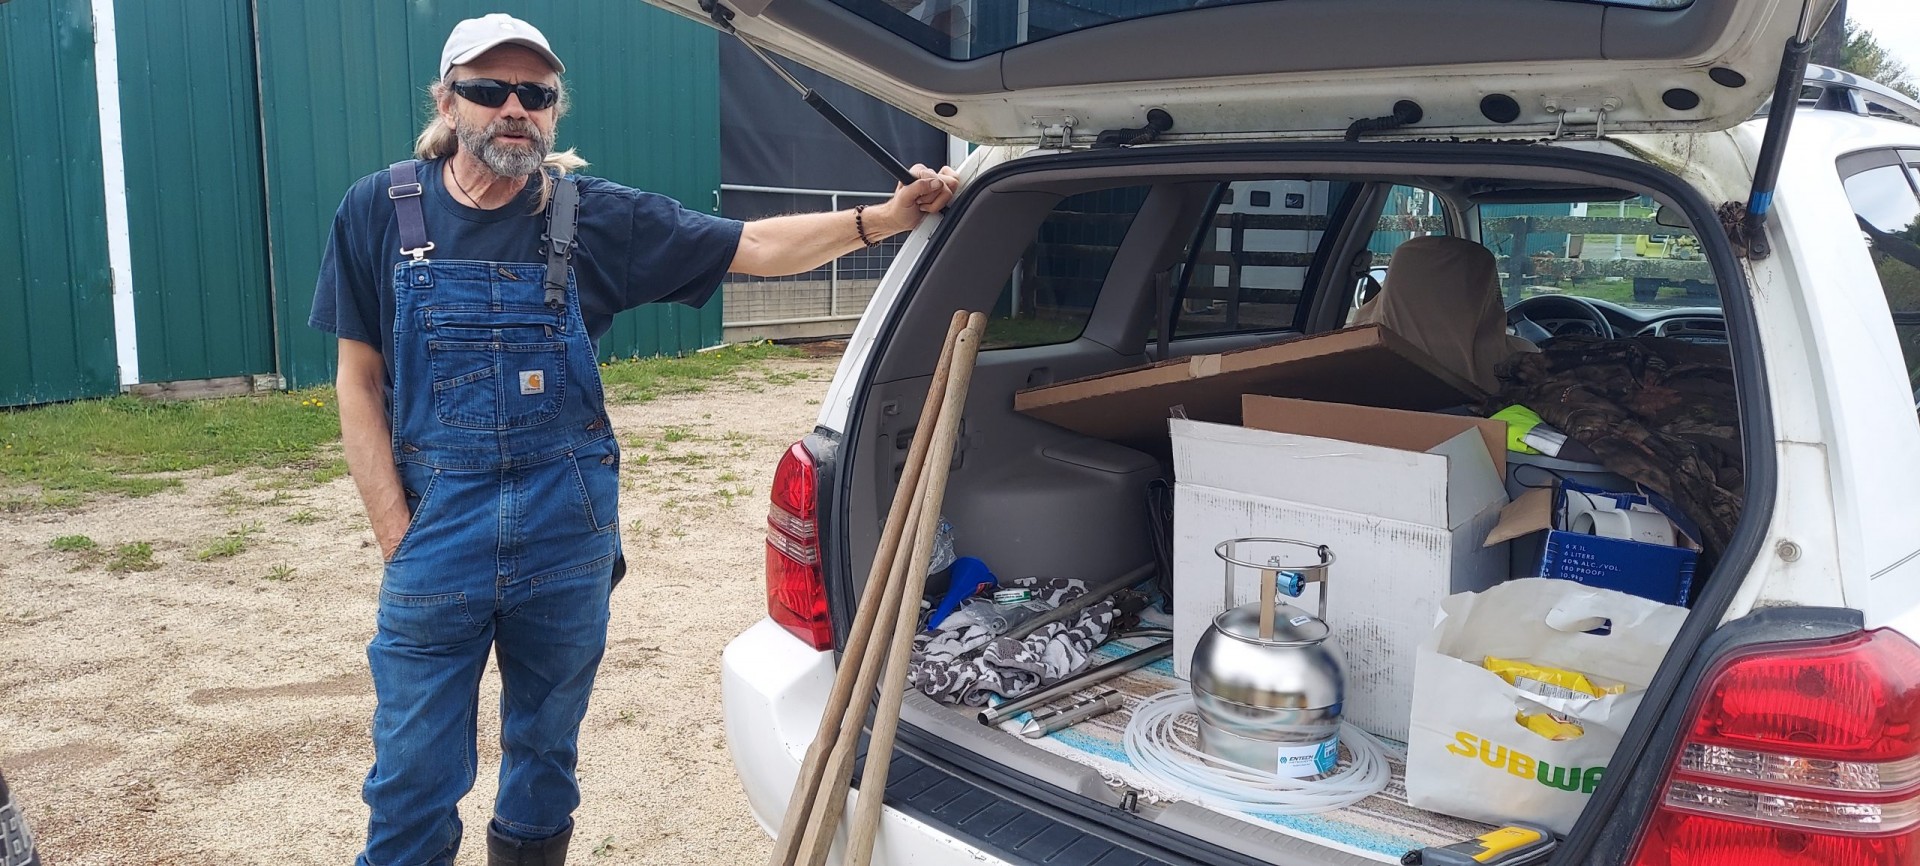 community led science uncovers high air pollution from fracking in ohio county